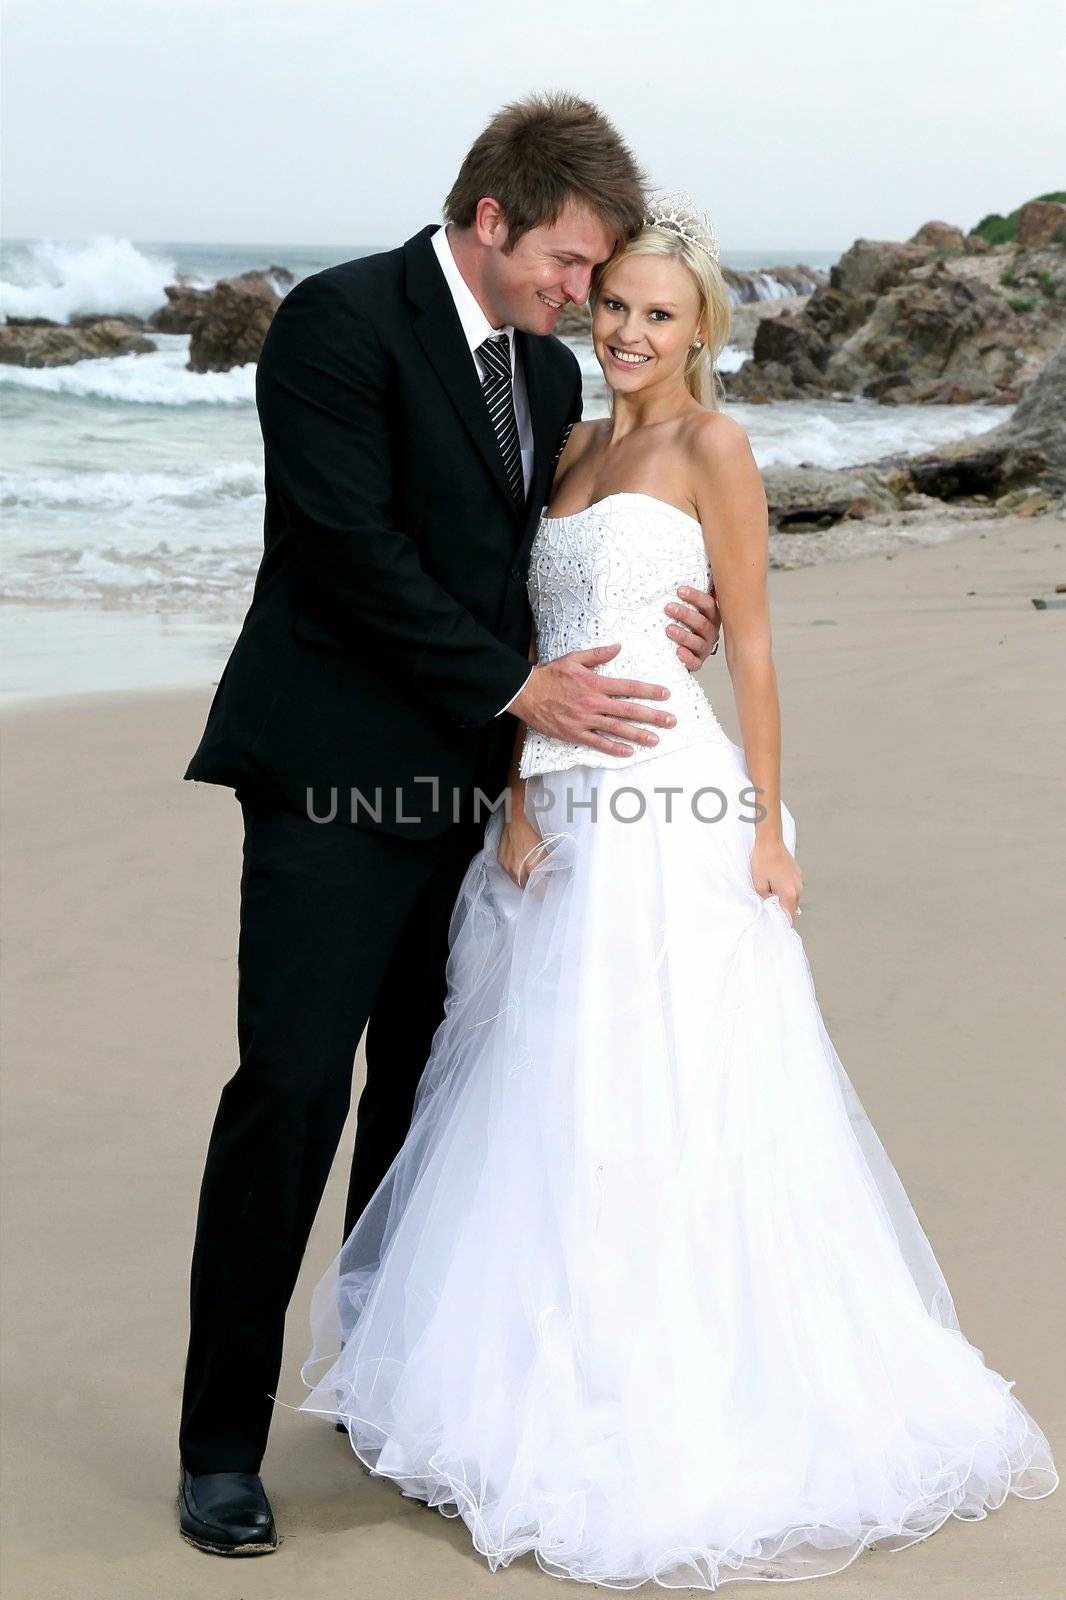 Gorgeous wedding couple on the beach on their special day